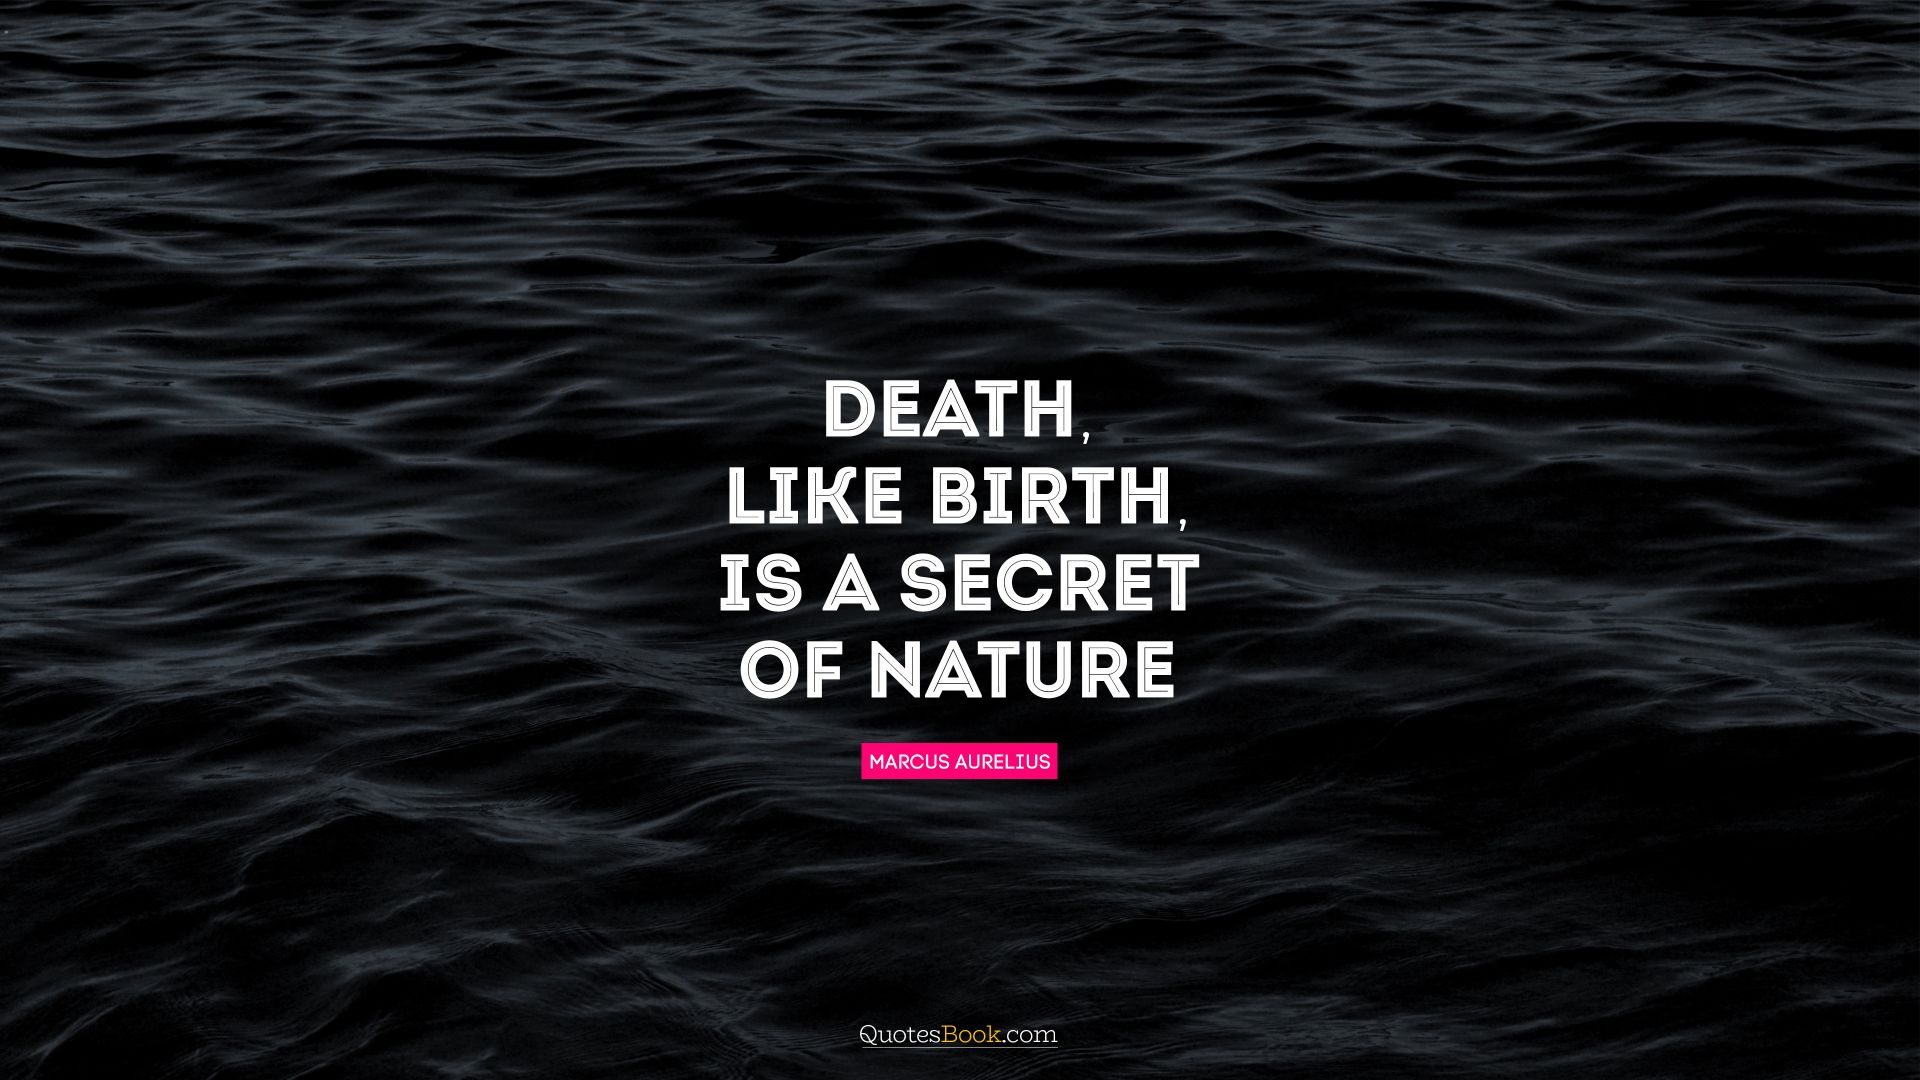 Death, like birth, is a secret of Nature. - Quote by Marcus Aurelius